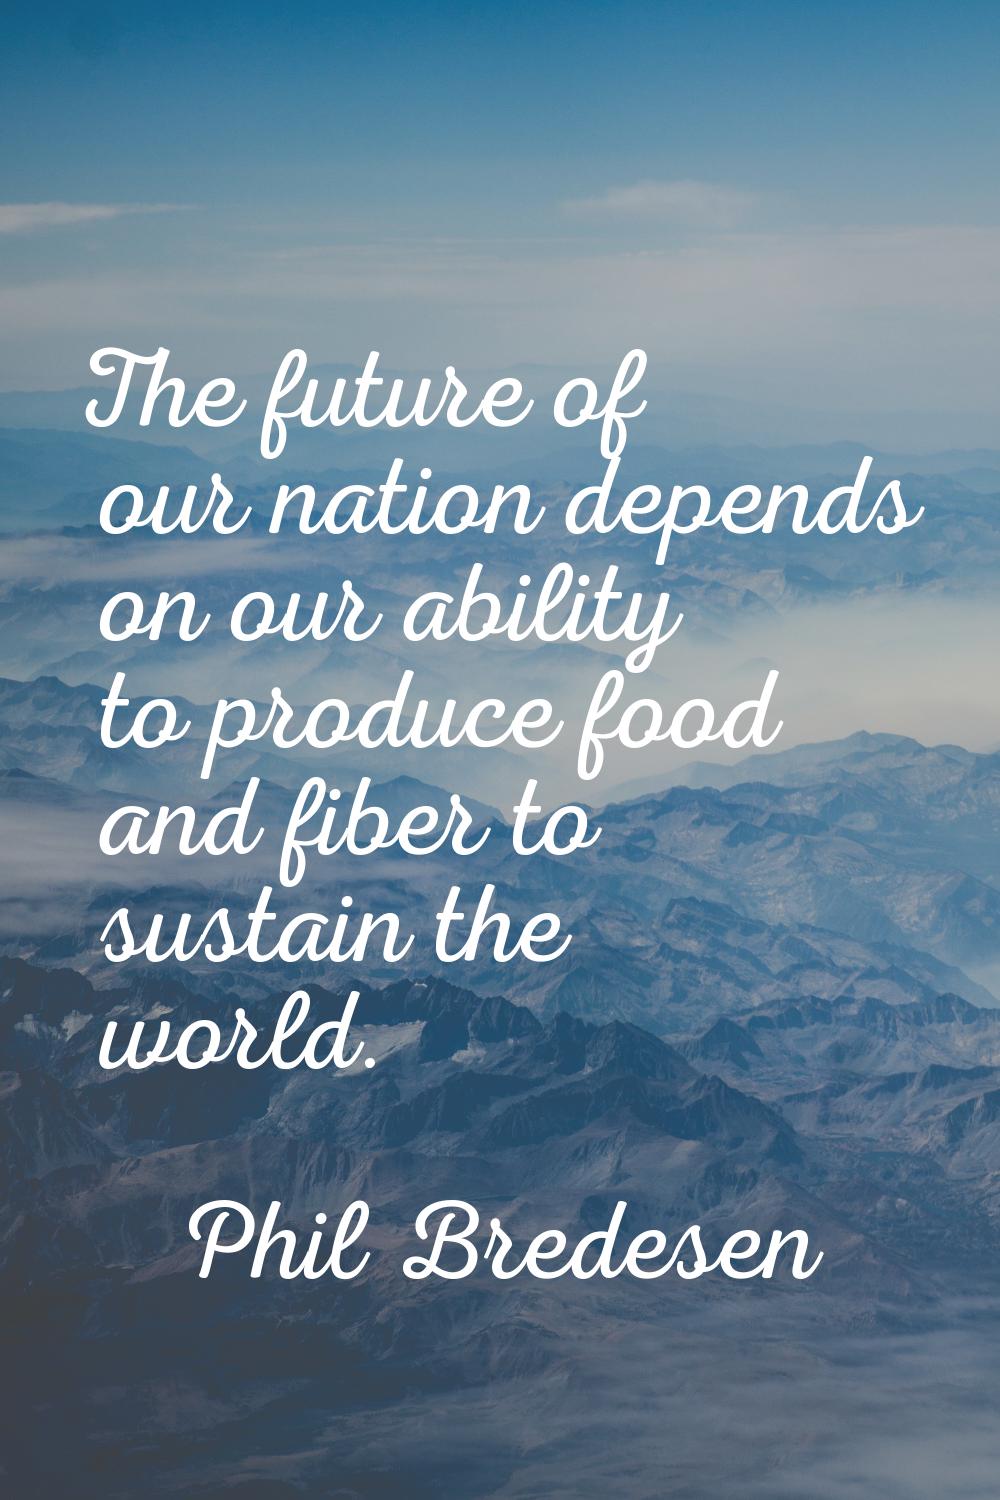 The future of our nation depends on our ability to produce food and fiber to sustain the world.